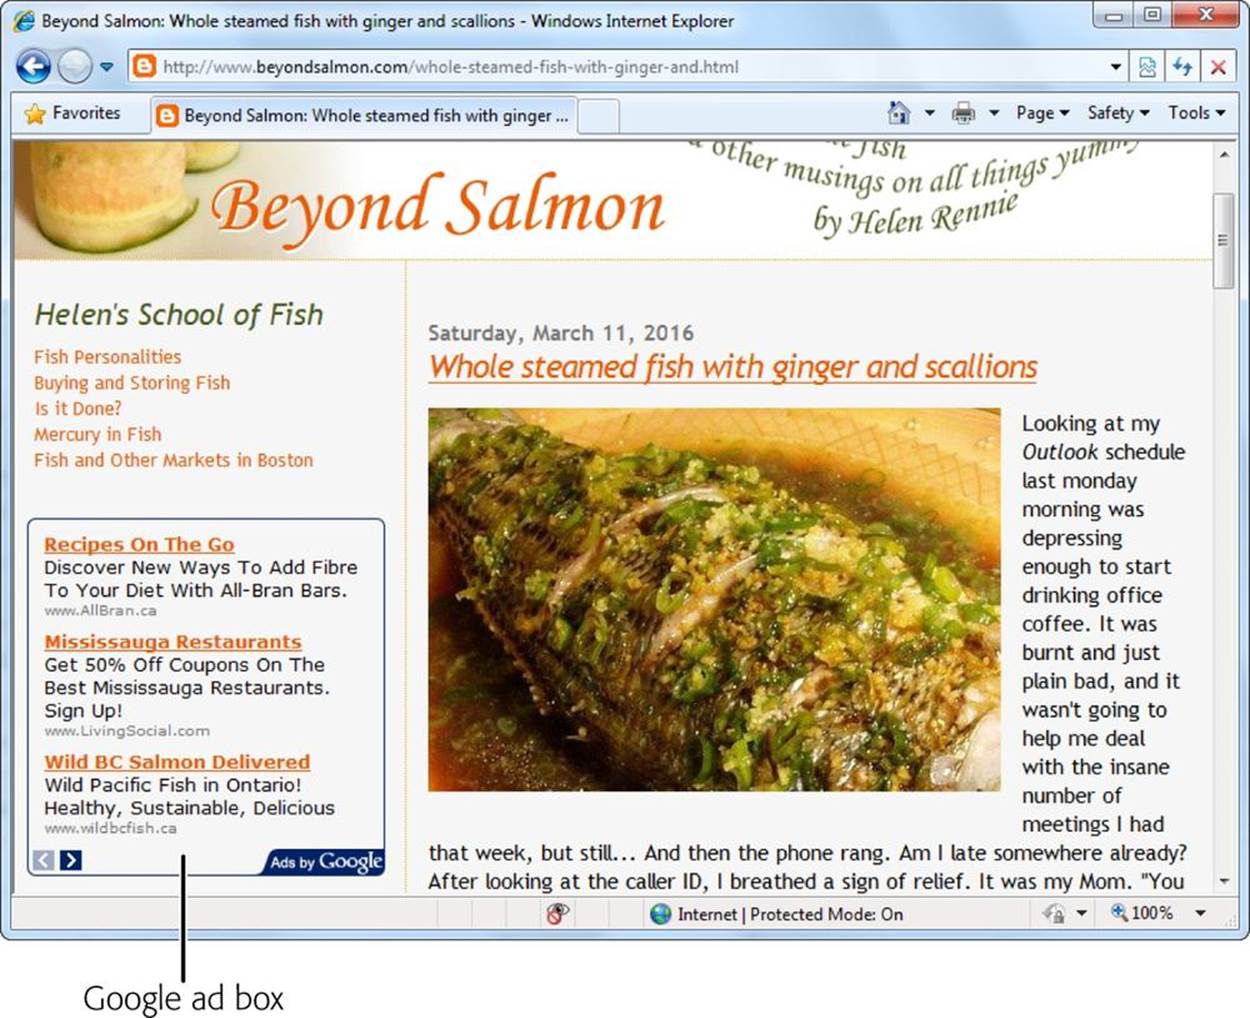 This website nestles a box of three Google AdSense ads alongside a scrumptious recipe. The ads blend into the scenery perfectly because they have a similar visual style (the same background color and font), and because the content matches the article. Google calls this grouping of ads an “ad unit.” You choose the ad layout and the number of ads you want per page, so it’s up to you whether you want to slip a few ads in quietly or have them dominate your page